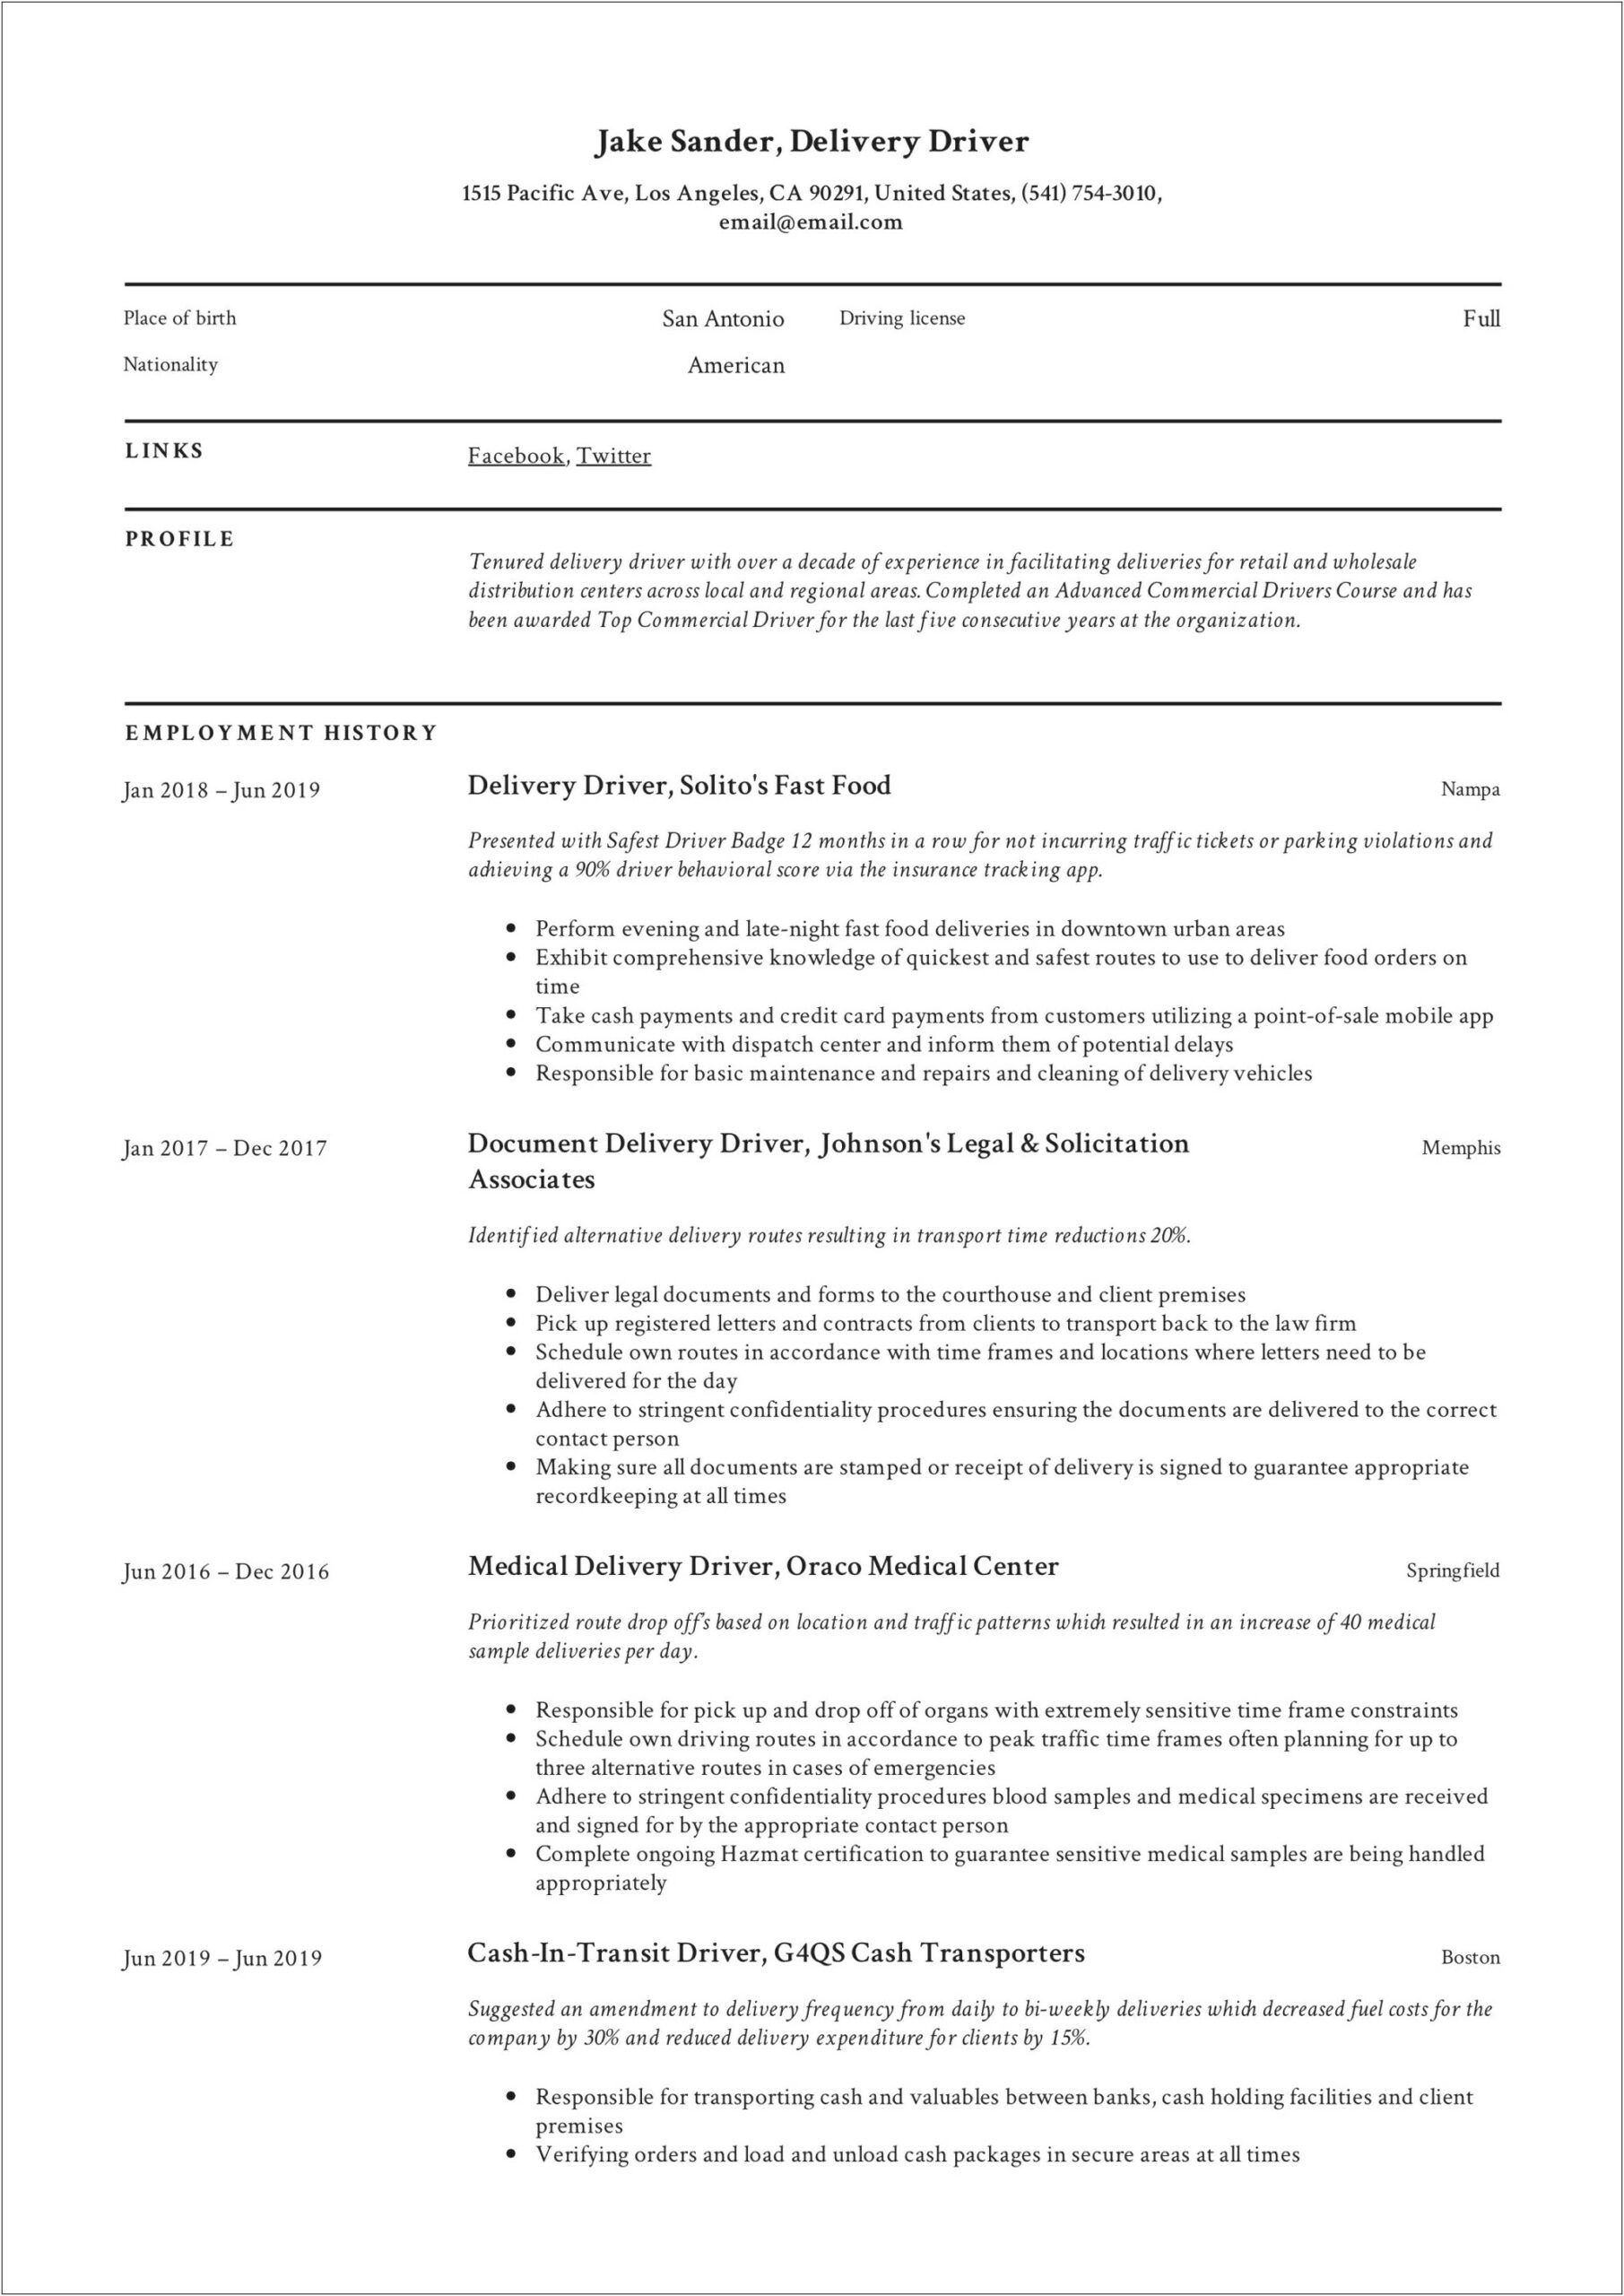 Resume Format For Courier Job